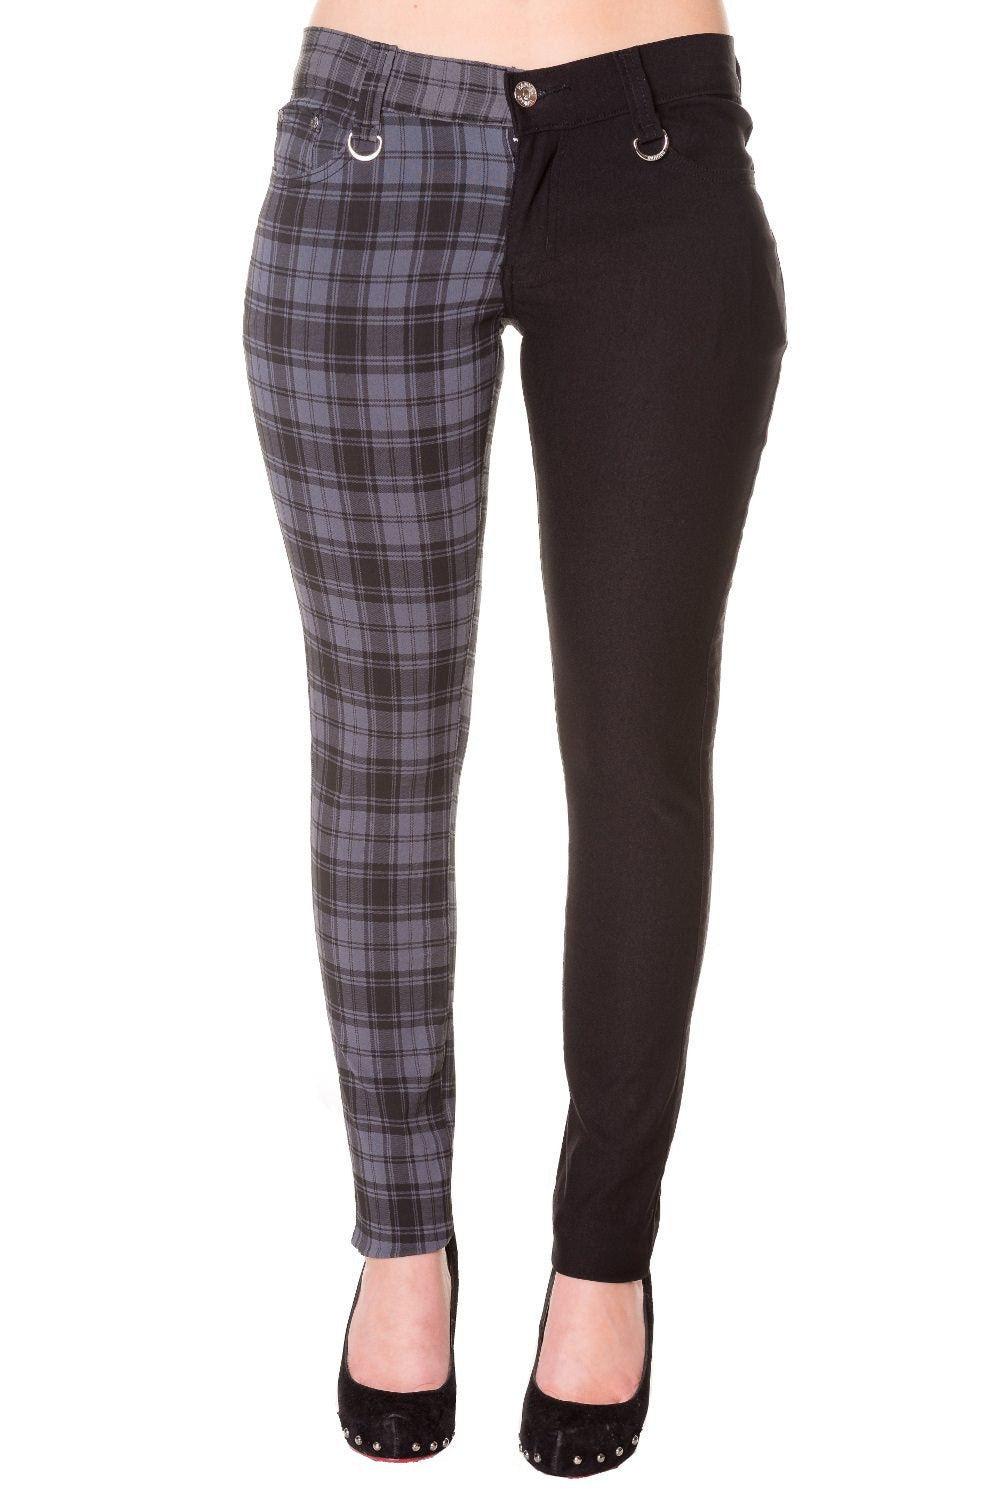 Low rise skinny jeans with one black leg and one grey check leg